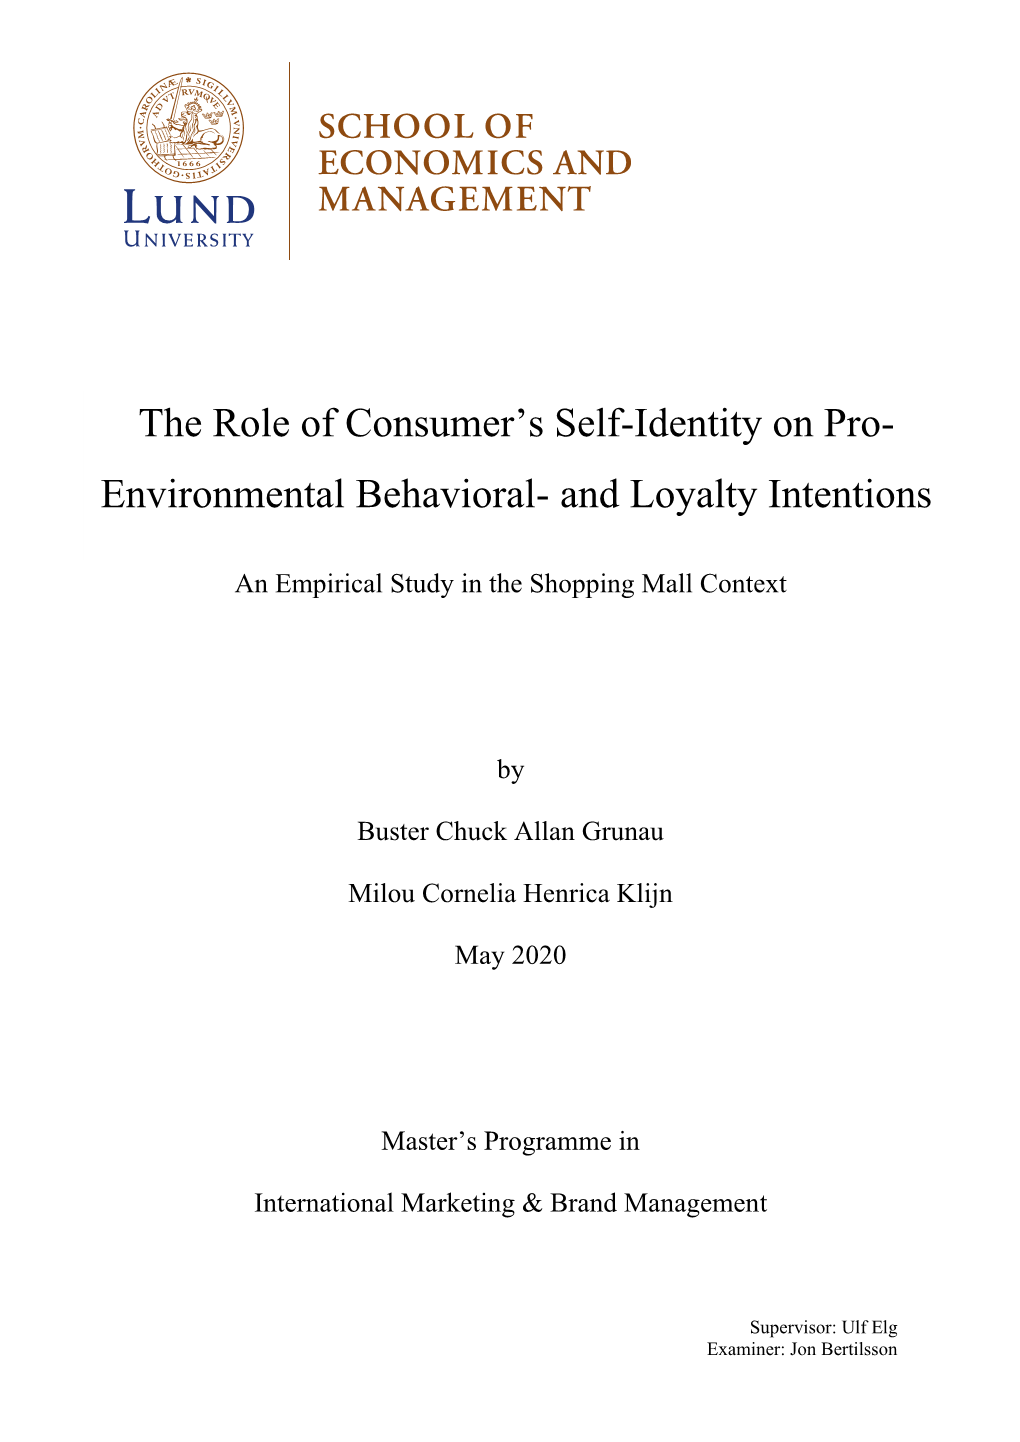 The Role of Consumer's Self-Identity on Pro- Environmental Behavioral- and Loyalty Intentions